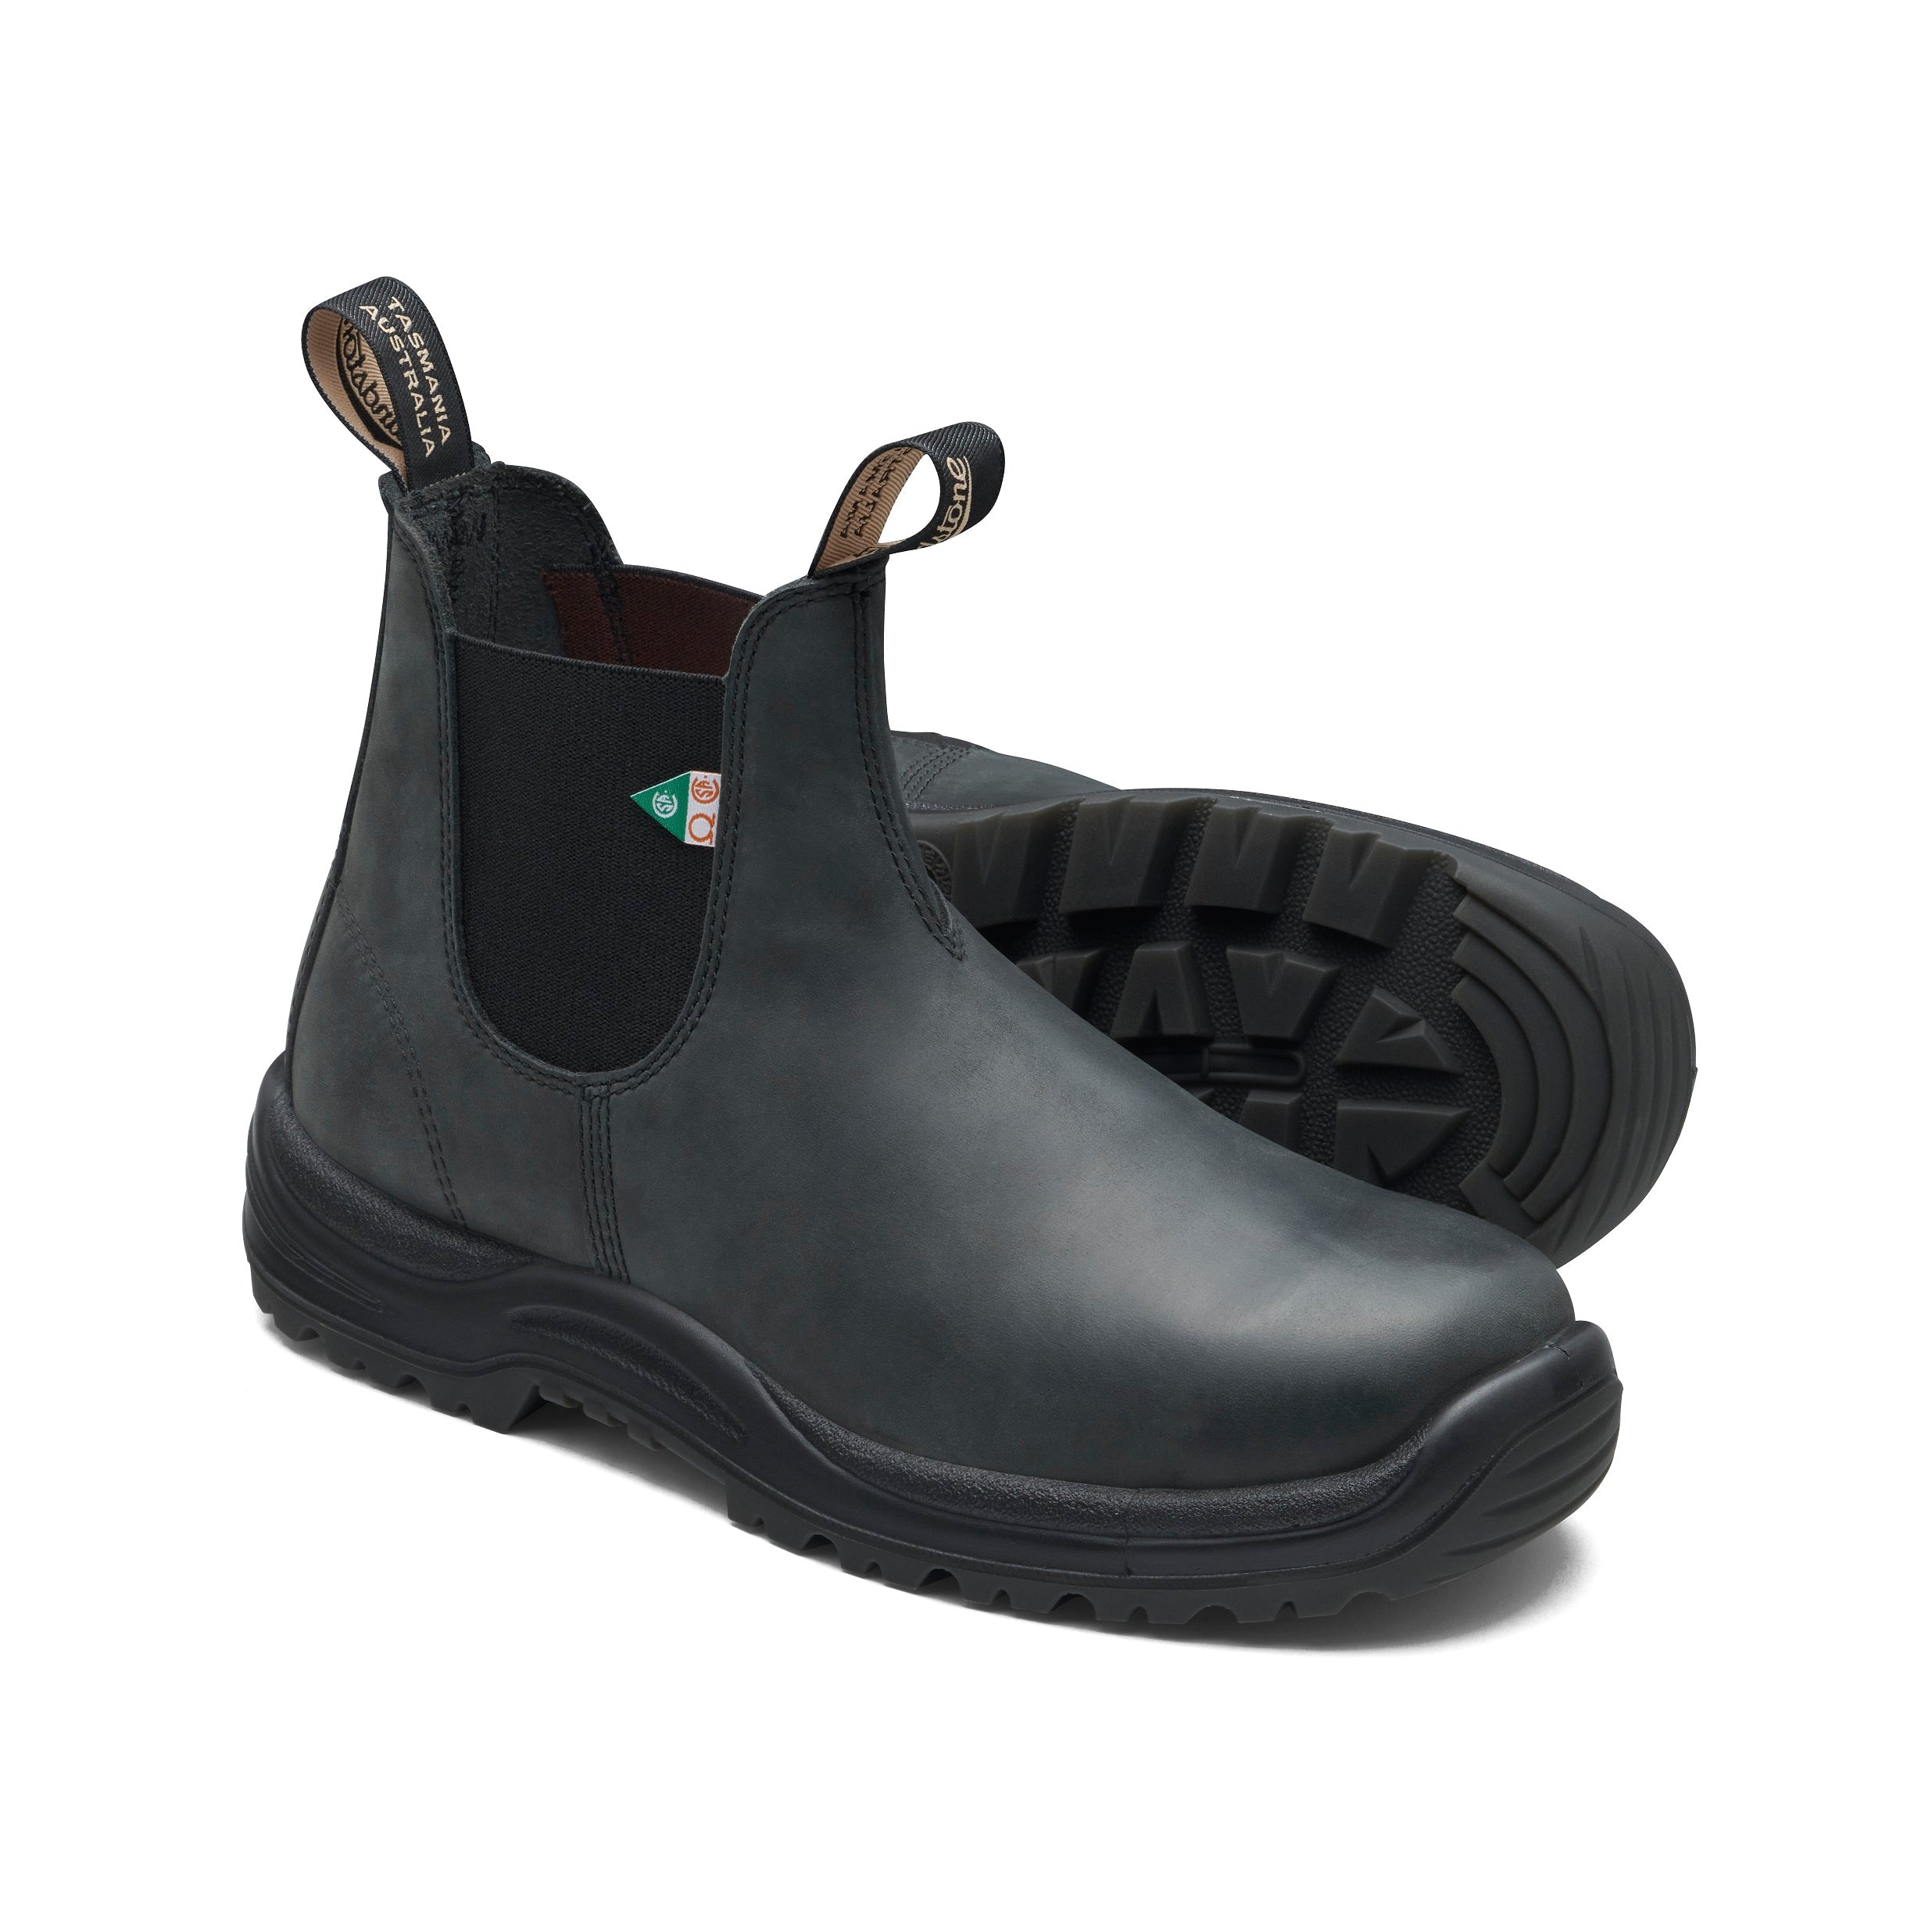 Blundstone #181 - CSA Work & Safety Boot (Waxy Rustic Black)